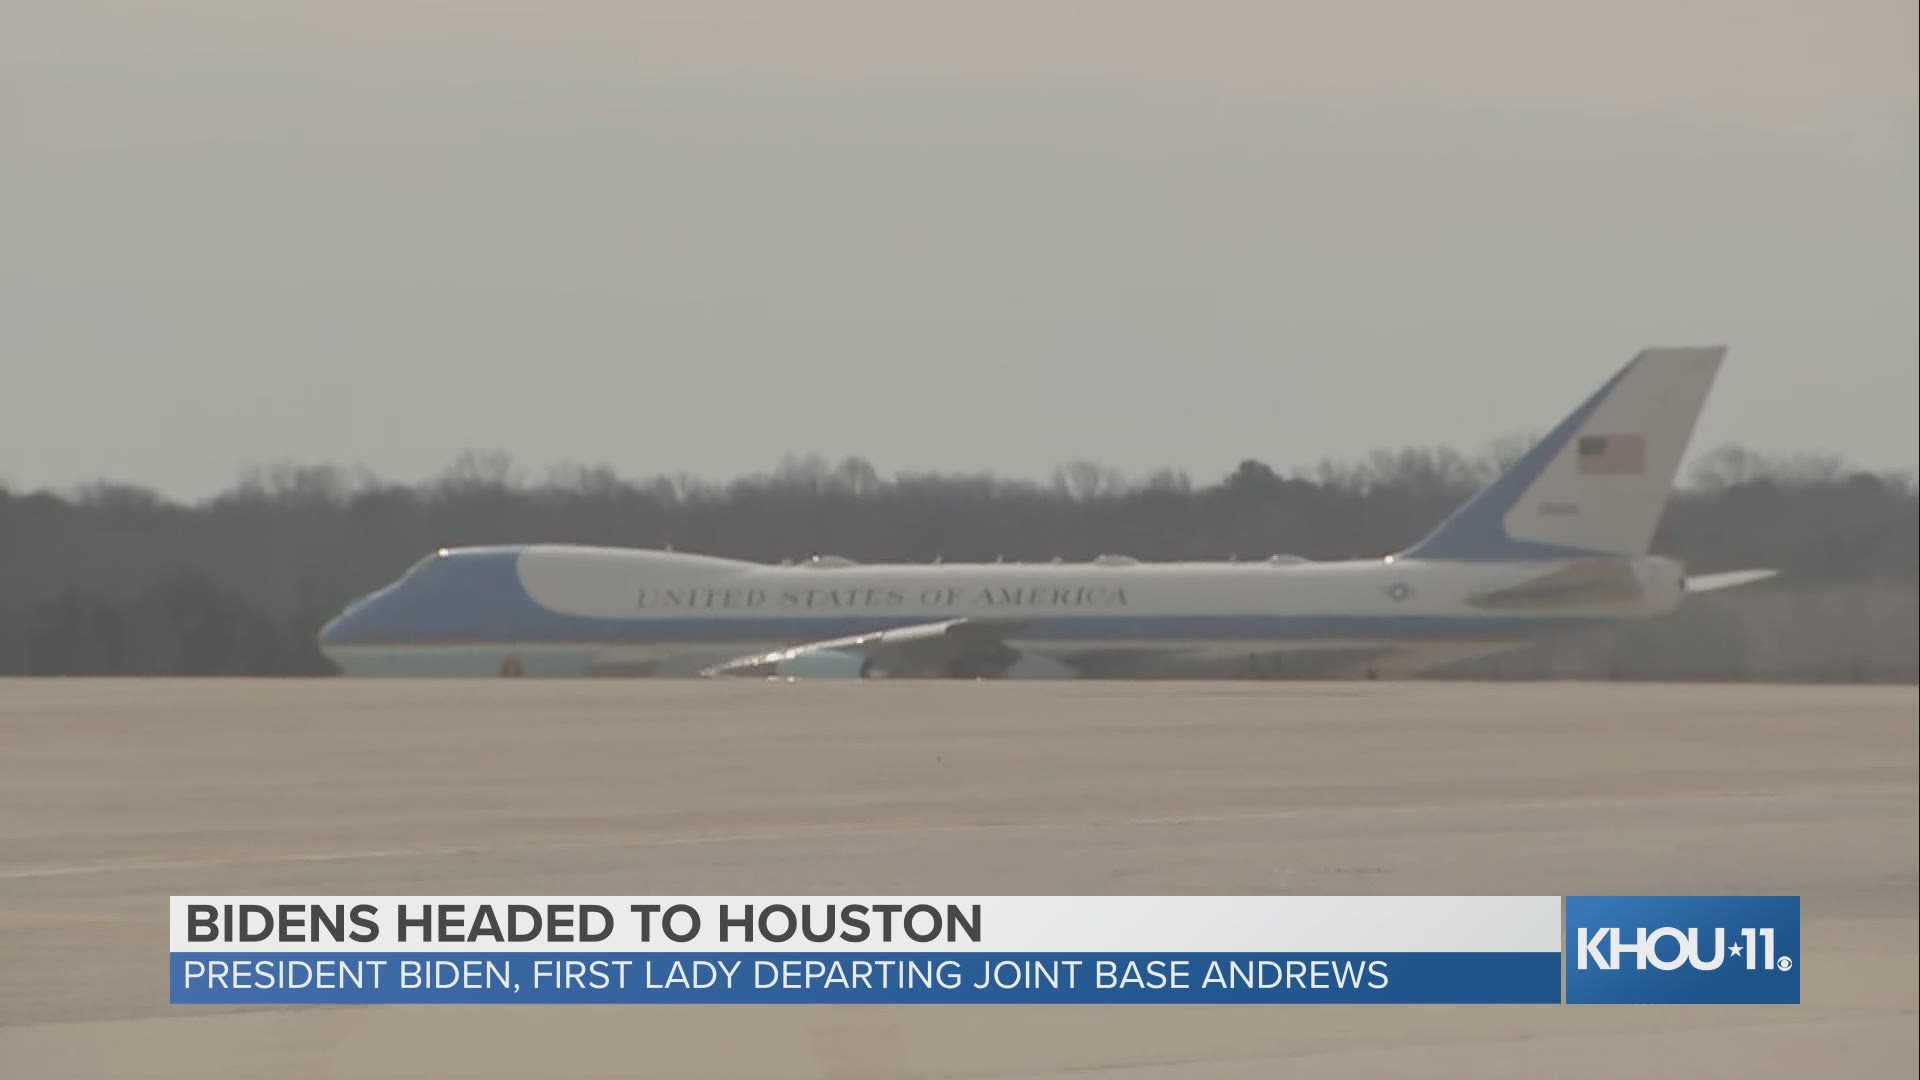 President Joe Biden and First Lady Dr. Jill Biden departed Joint Base Andrews Friday morning to head for Houston to look at winter storm damage.